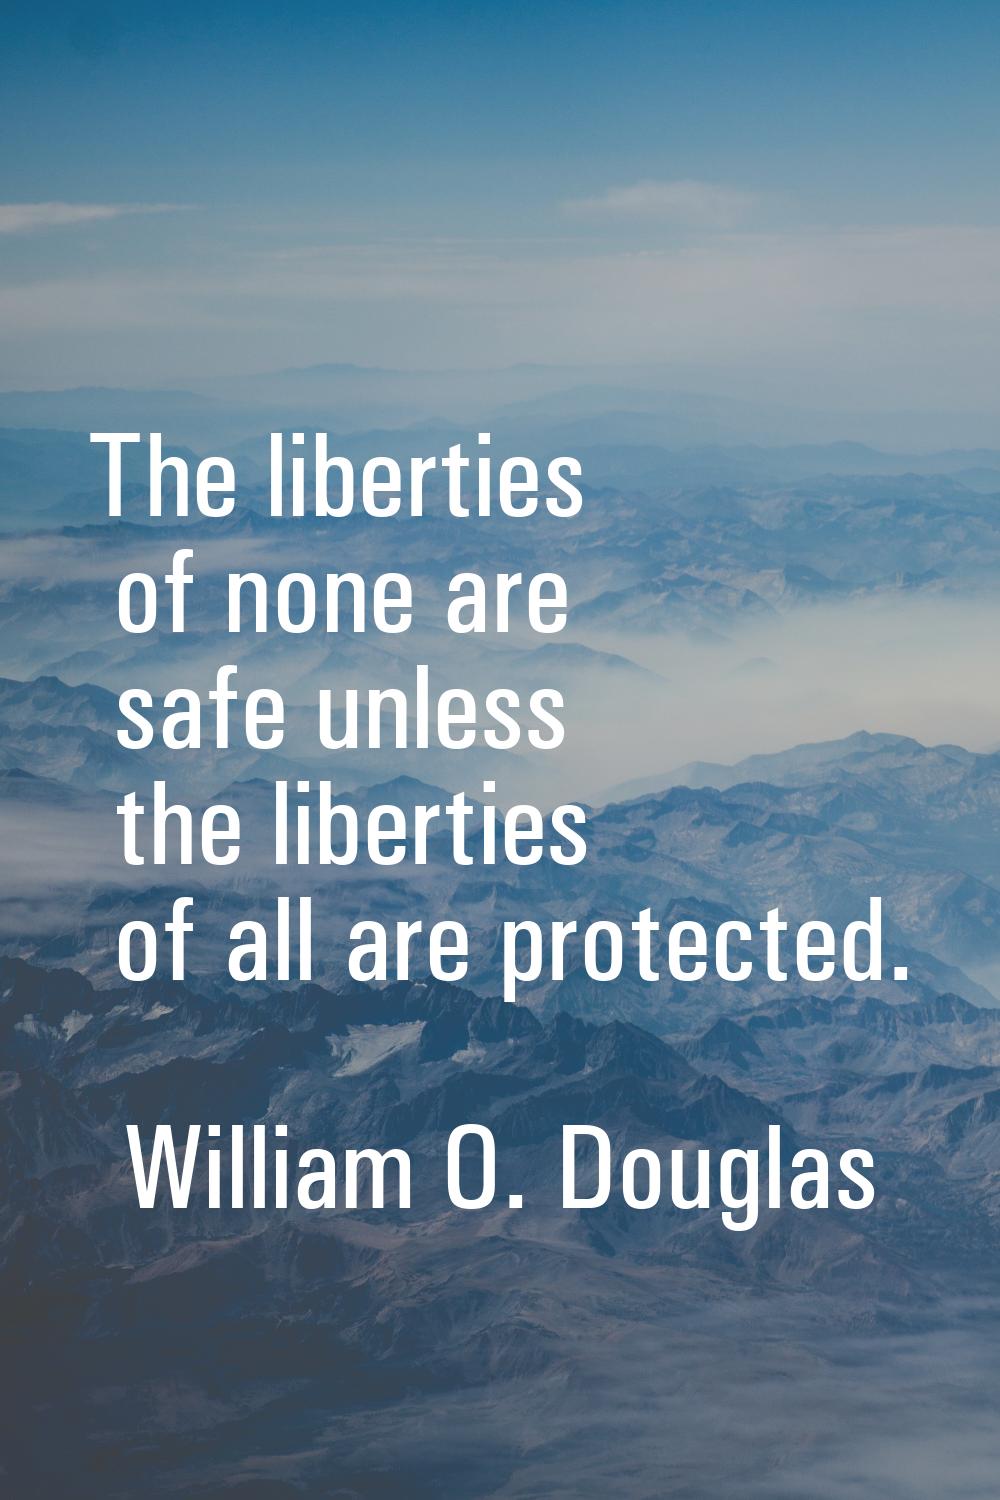 The liberties of none are safe unless the liberties of all are protected.